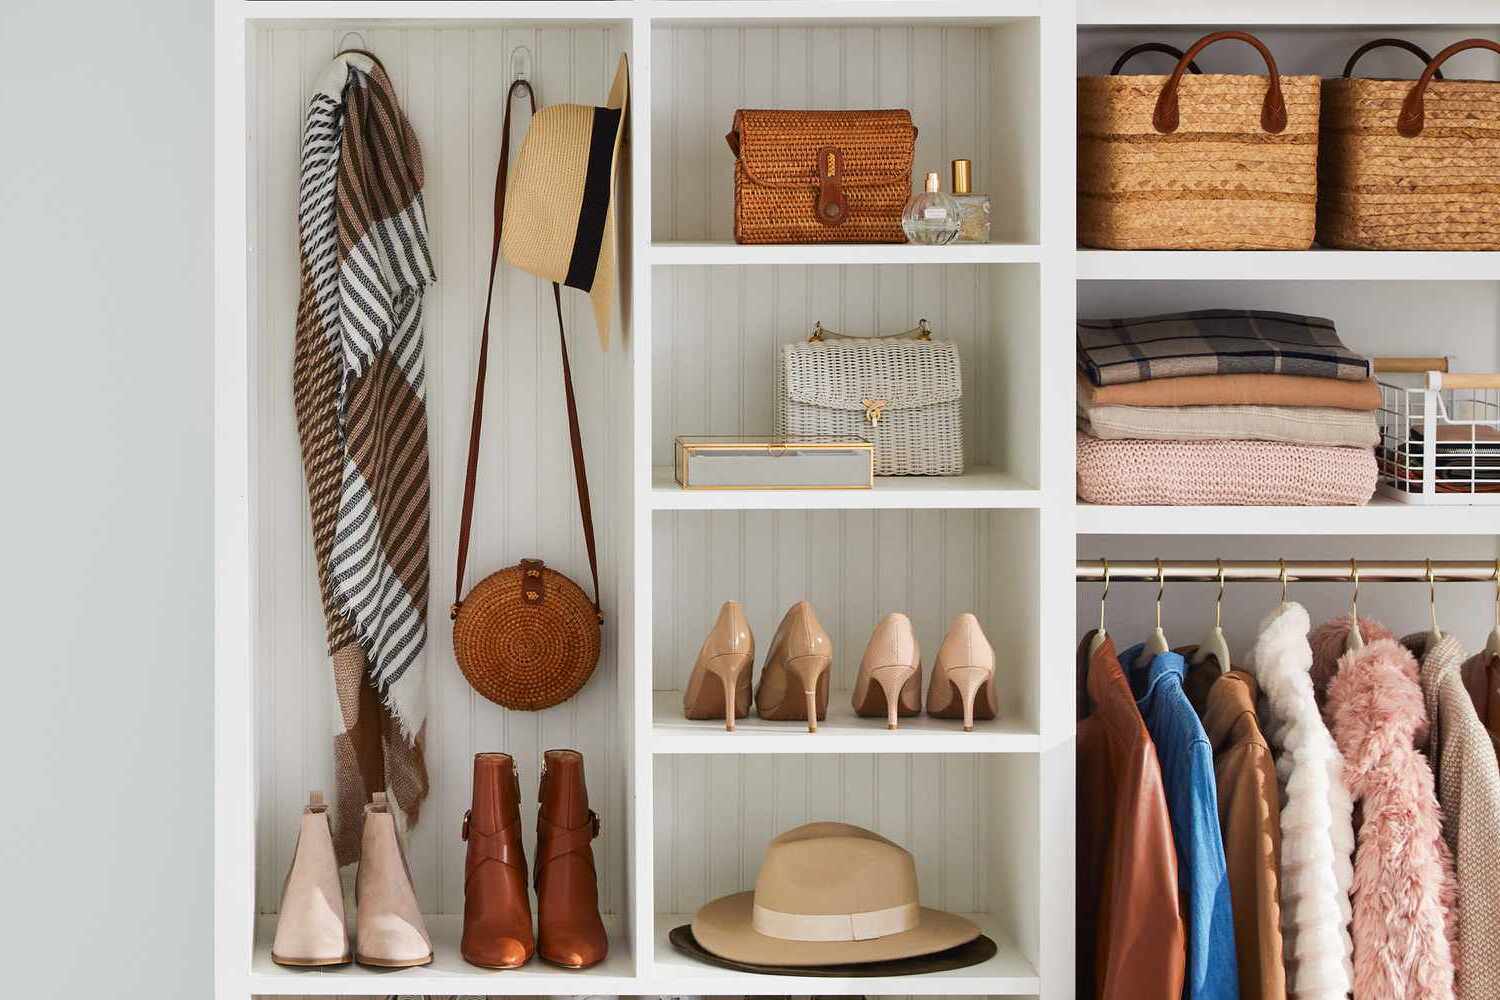 How To Build Shelves In A Closet